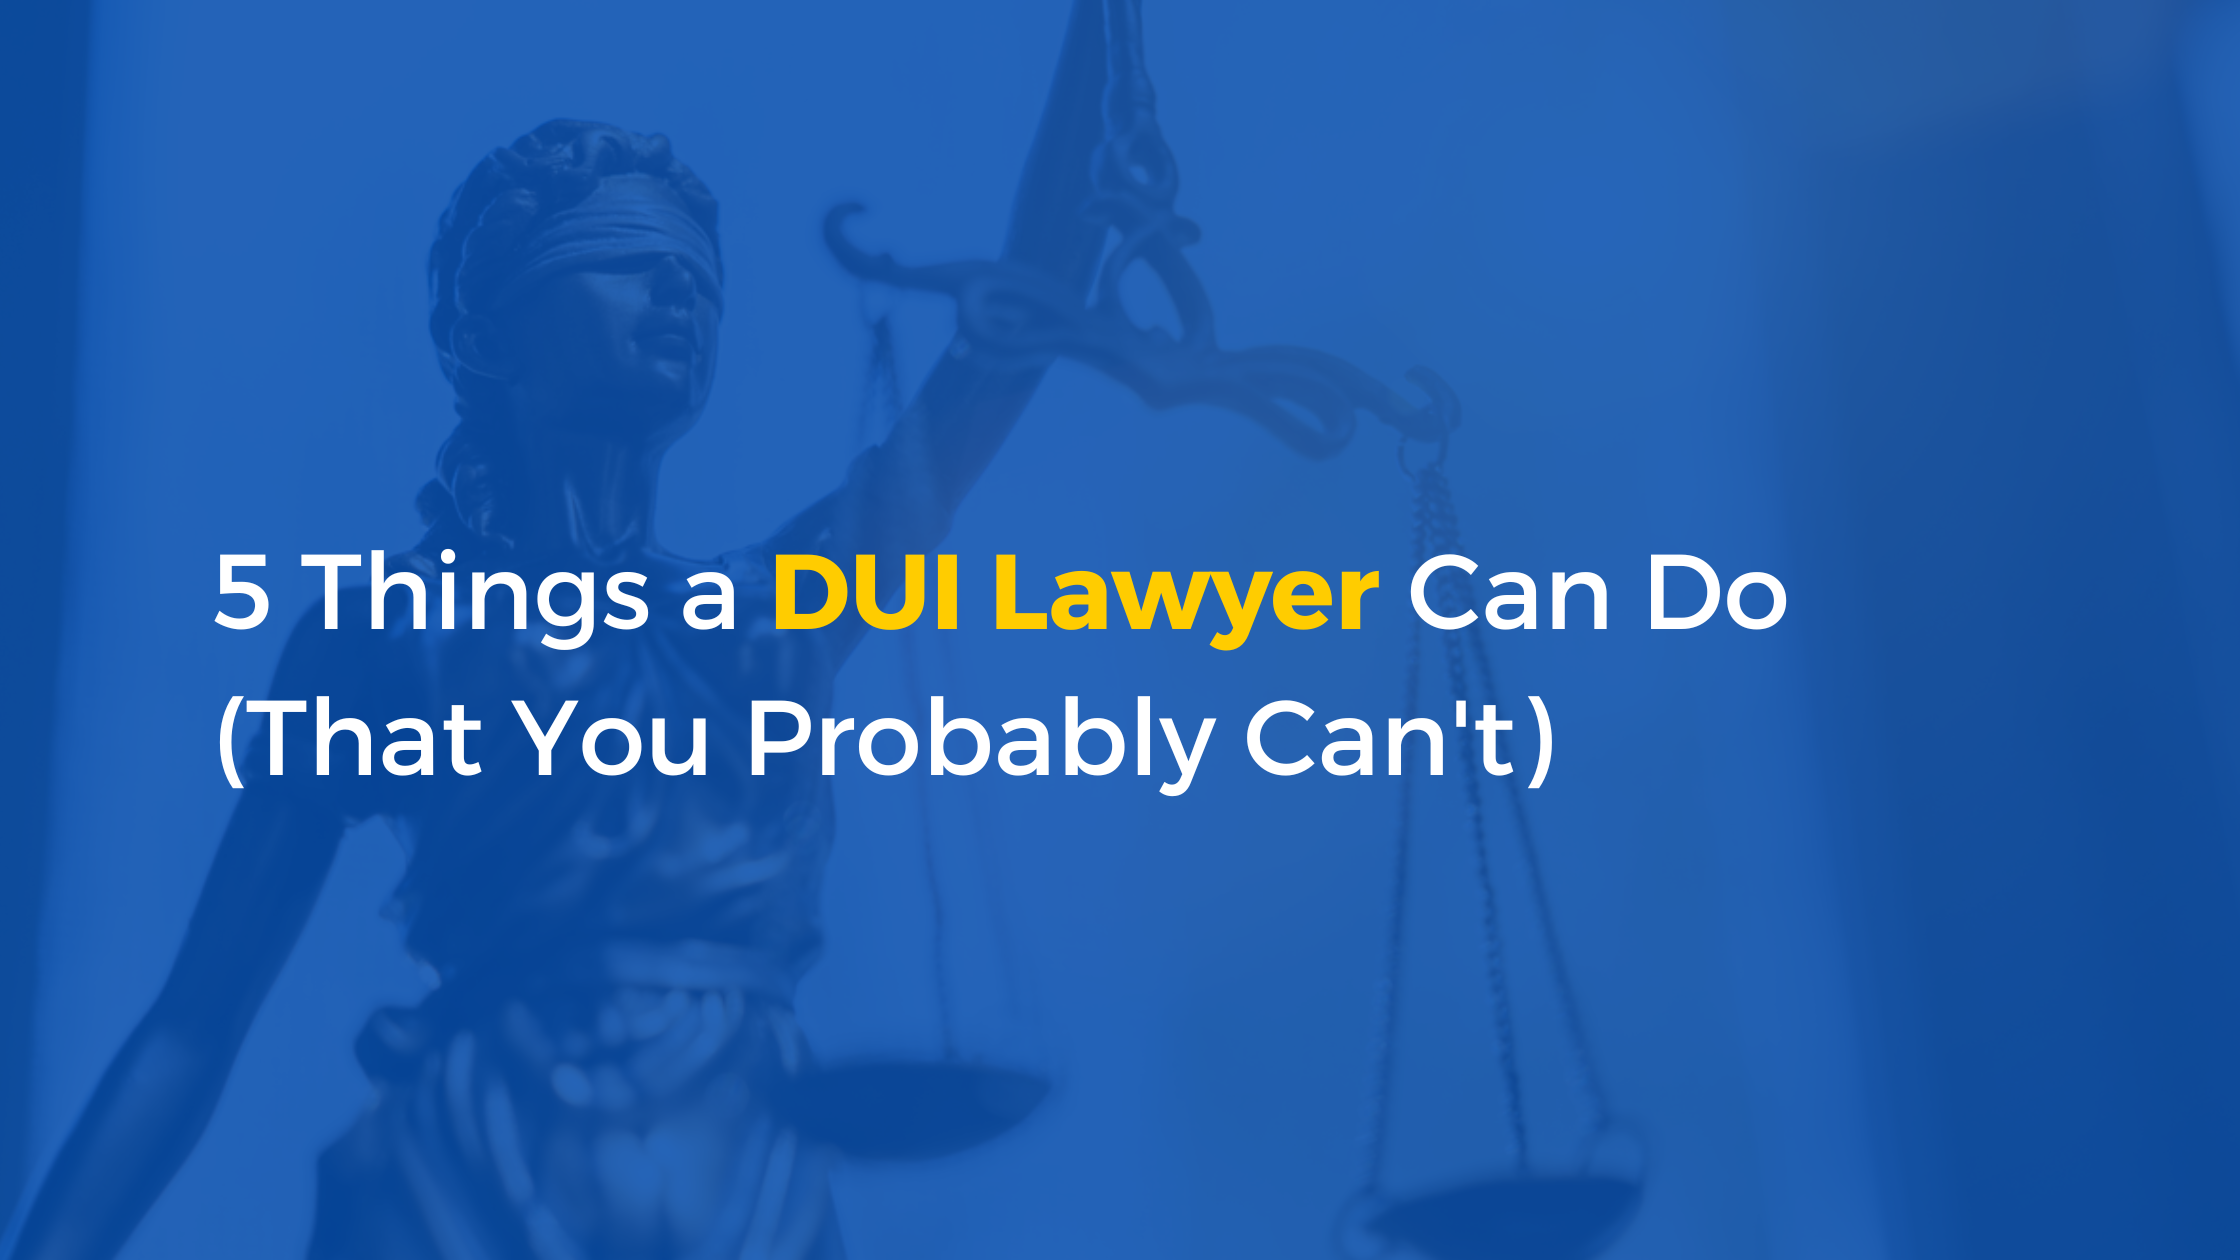 DUI Lawyer Can Do